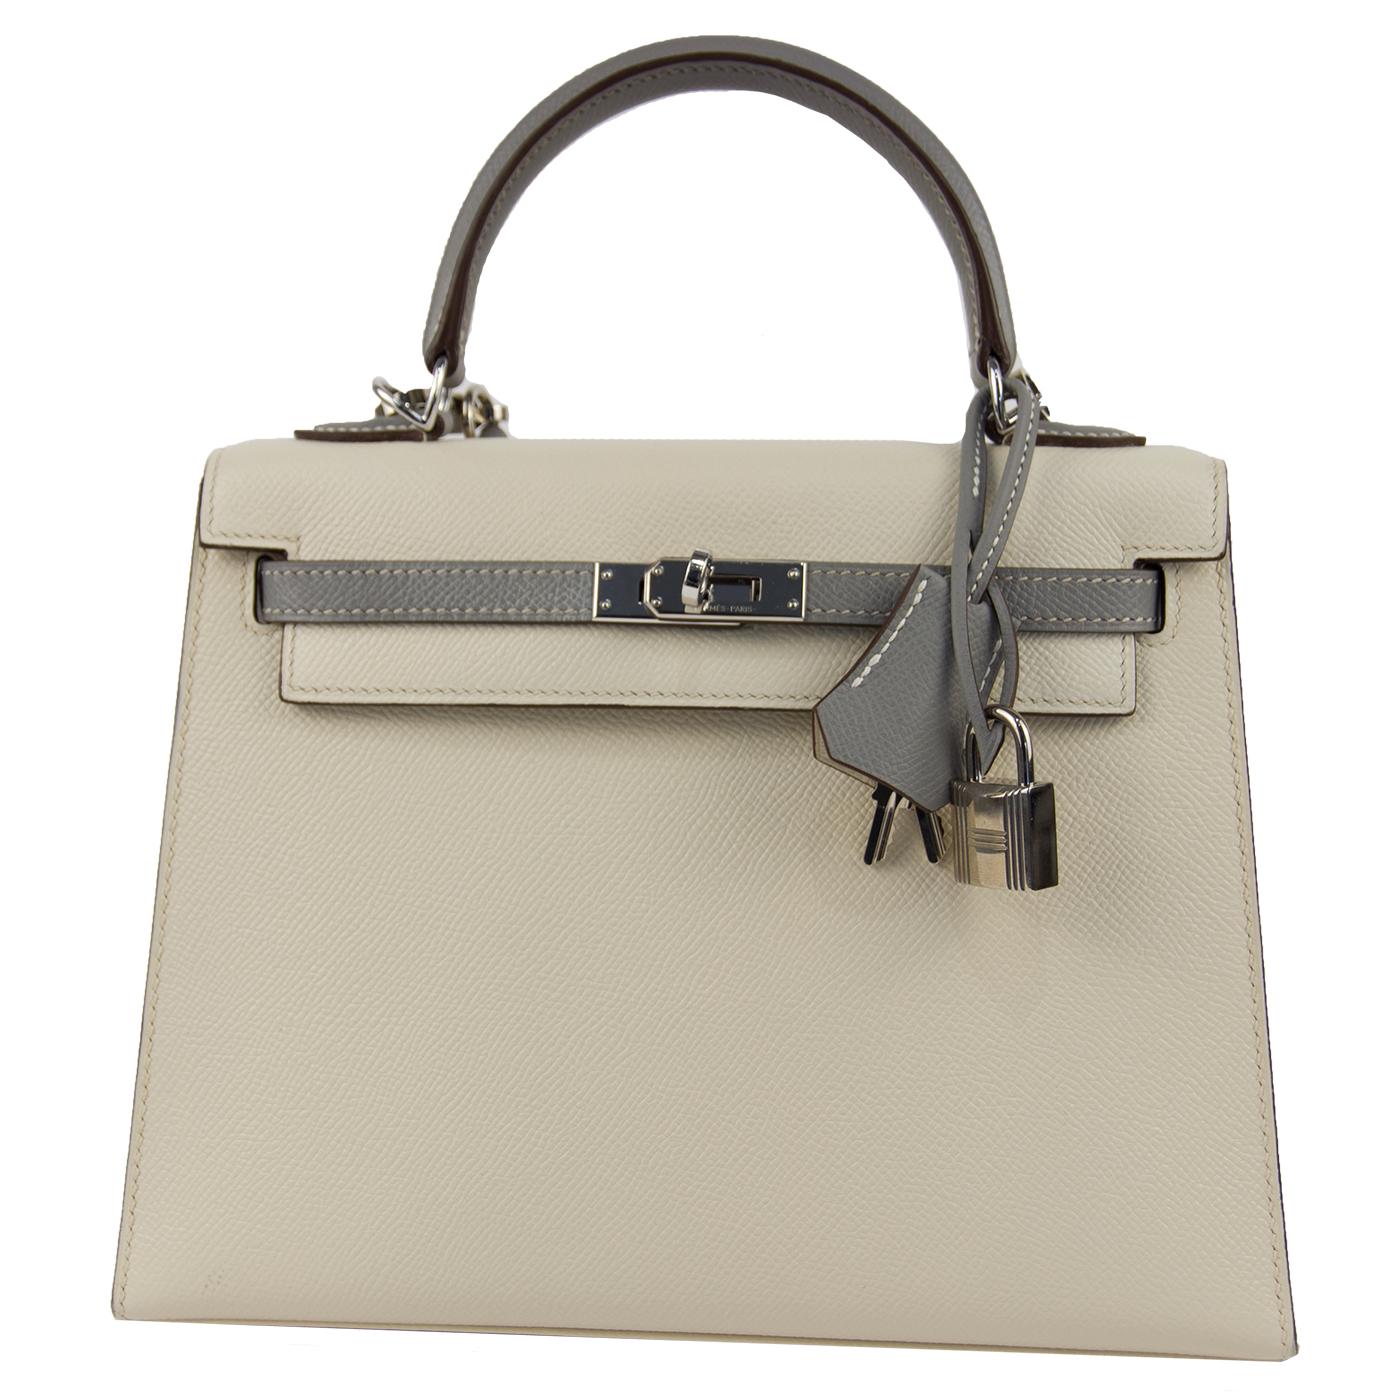 Hermes HSS Kelly Sellier 25 Craie/Gris Mouette Epsom Brushed Palladium Hardware In Good Condition For Sale In Aventura, FL